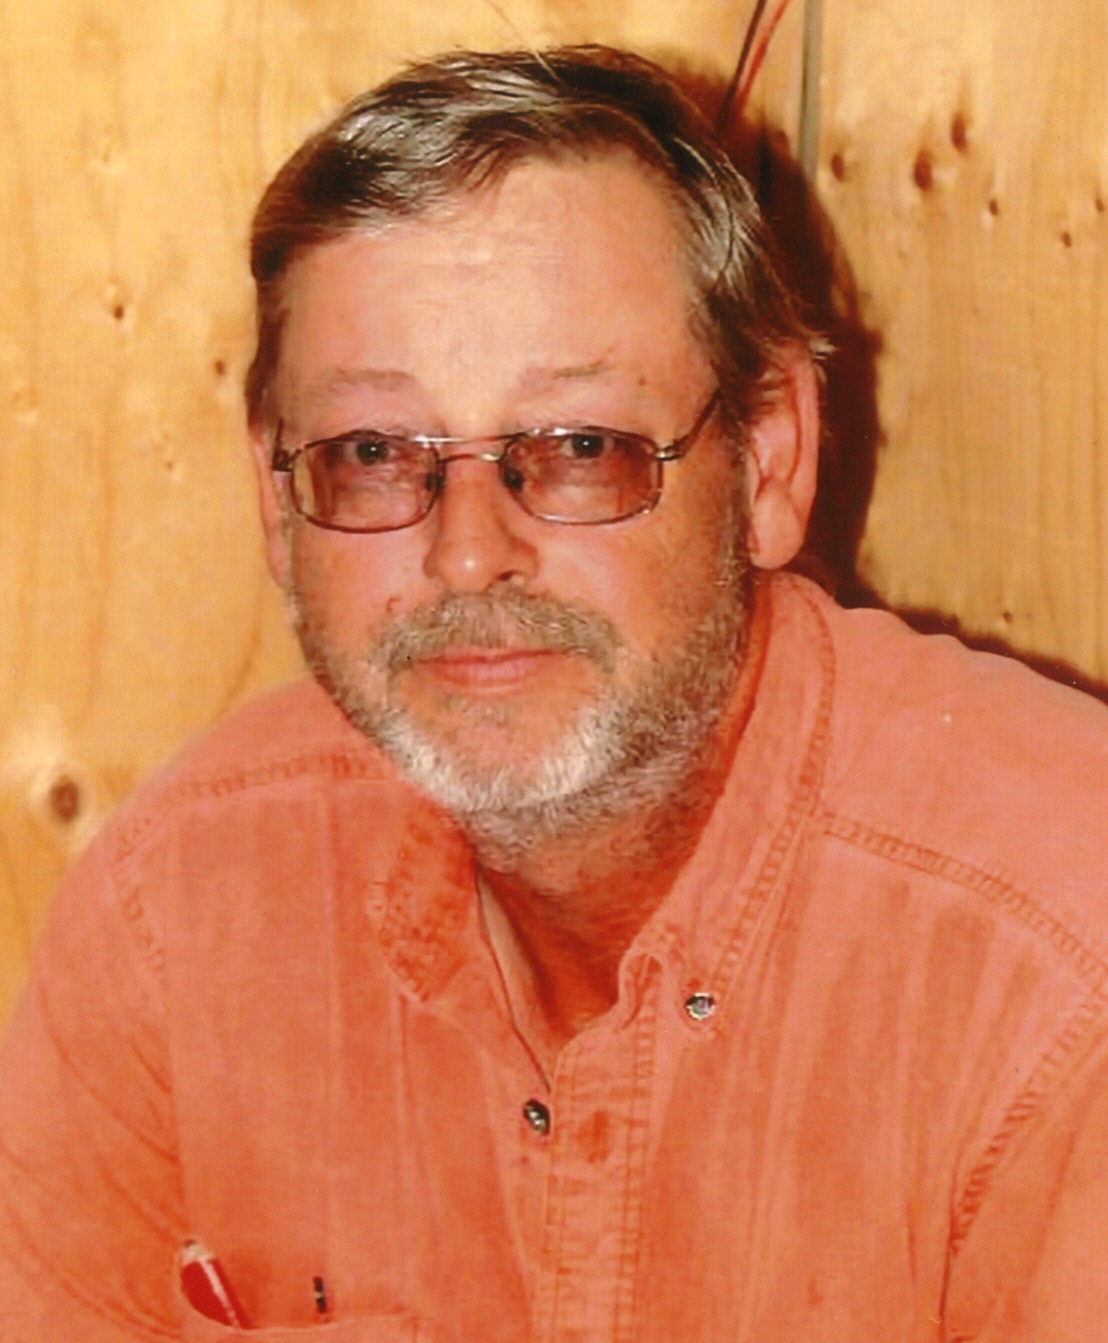 Obituary information for David William Rollings